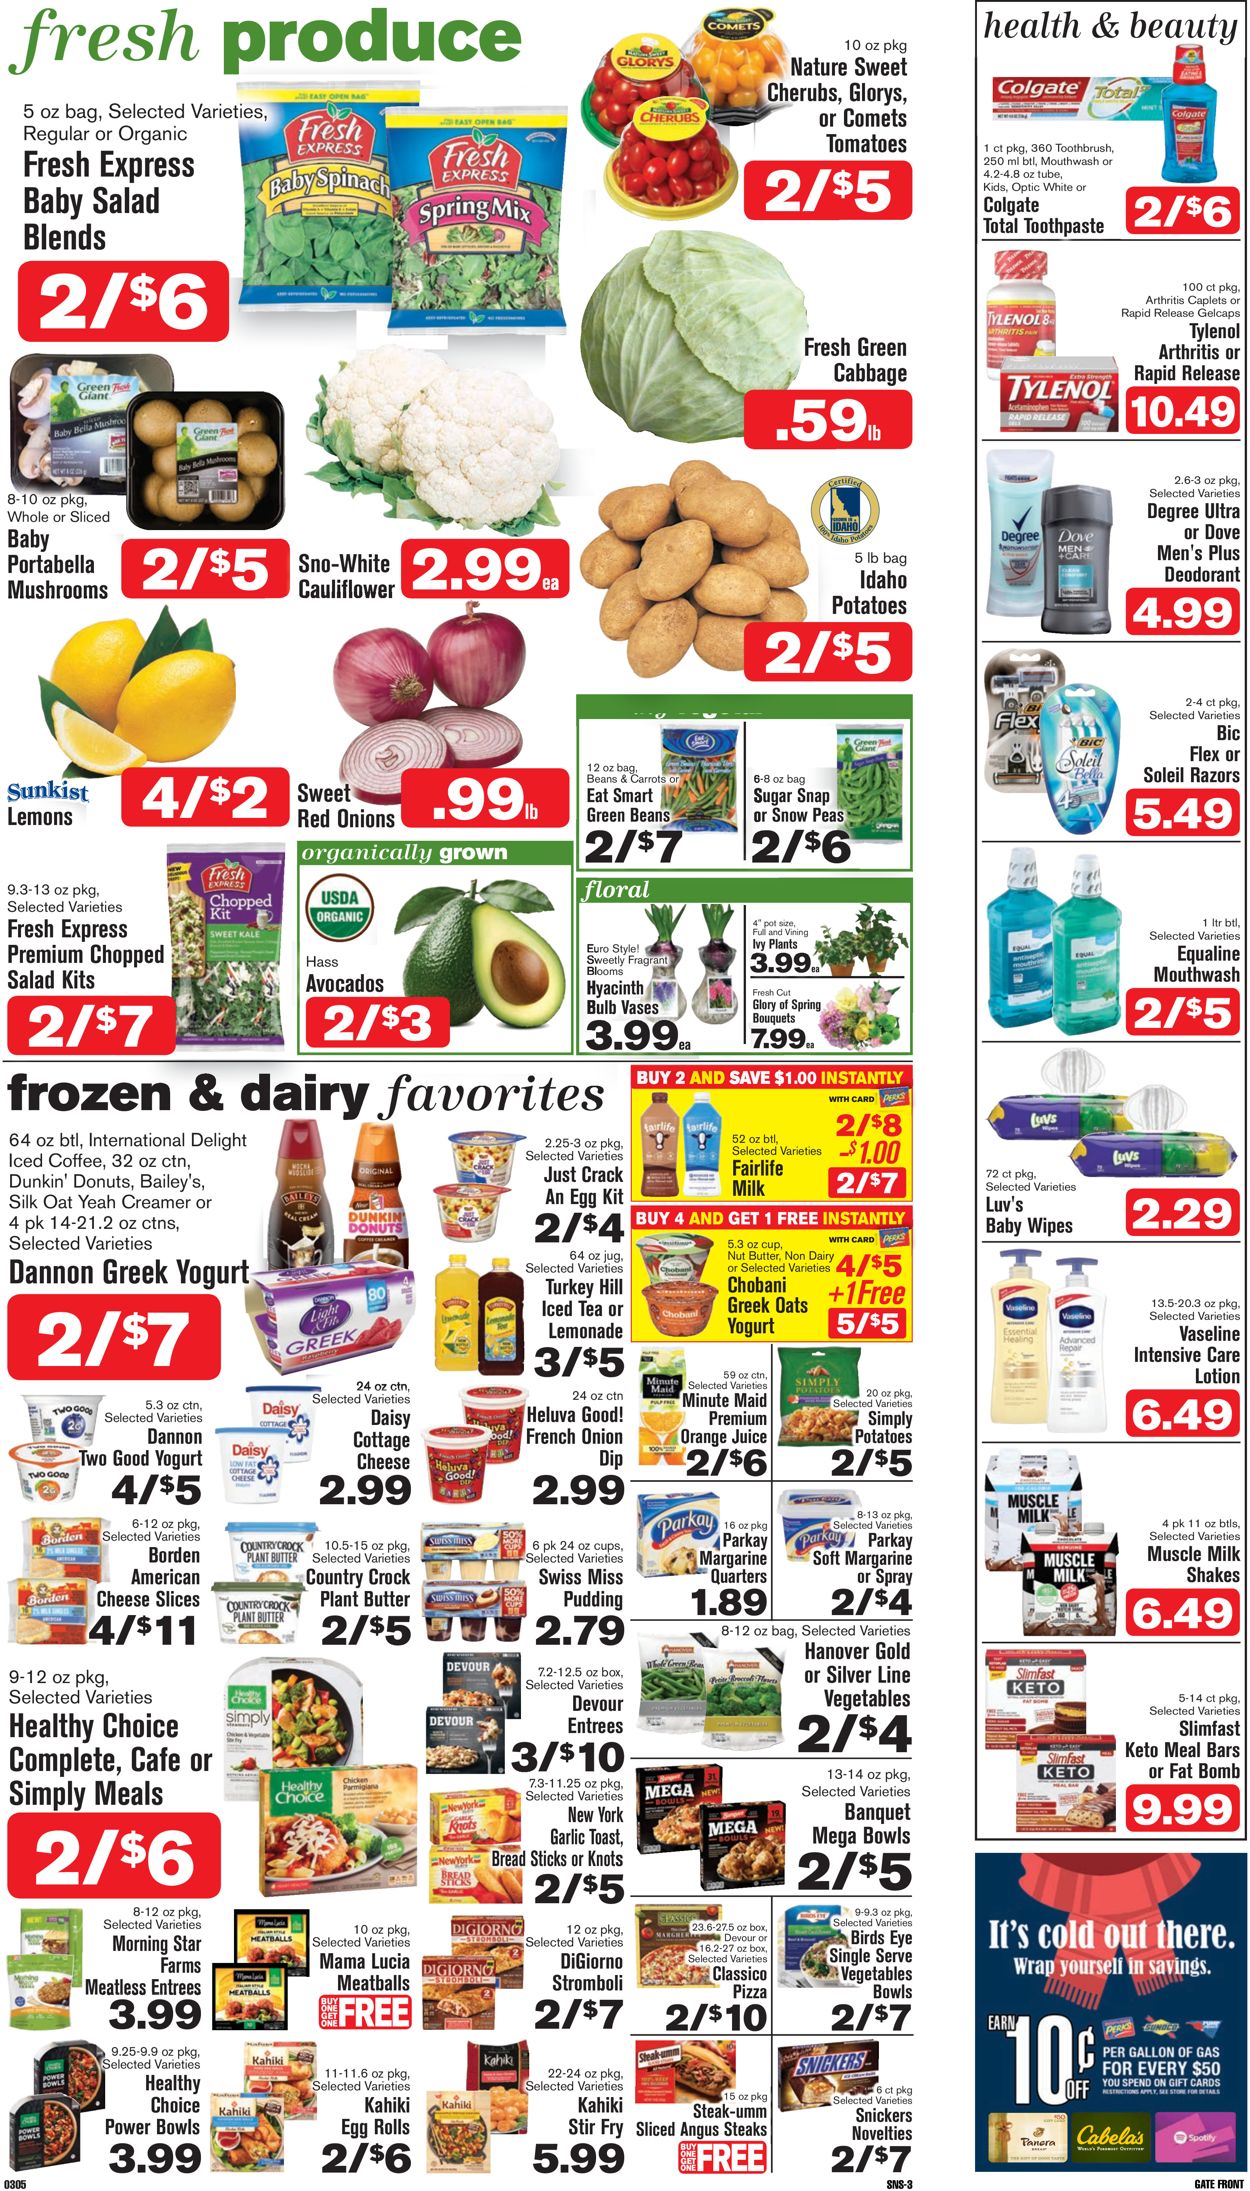 Catalogue Shop ‘n Save from 03/05/2020